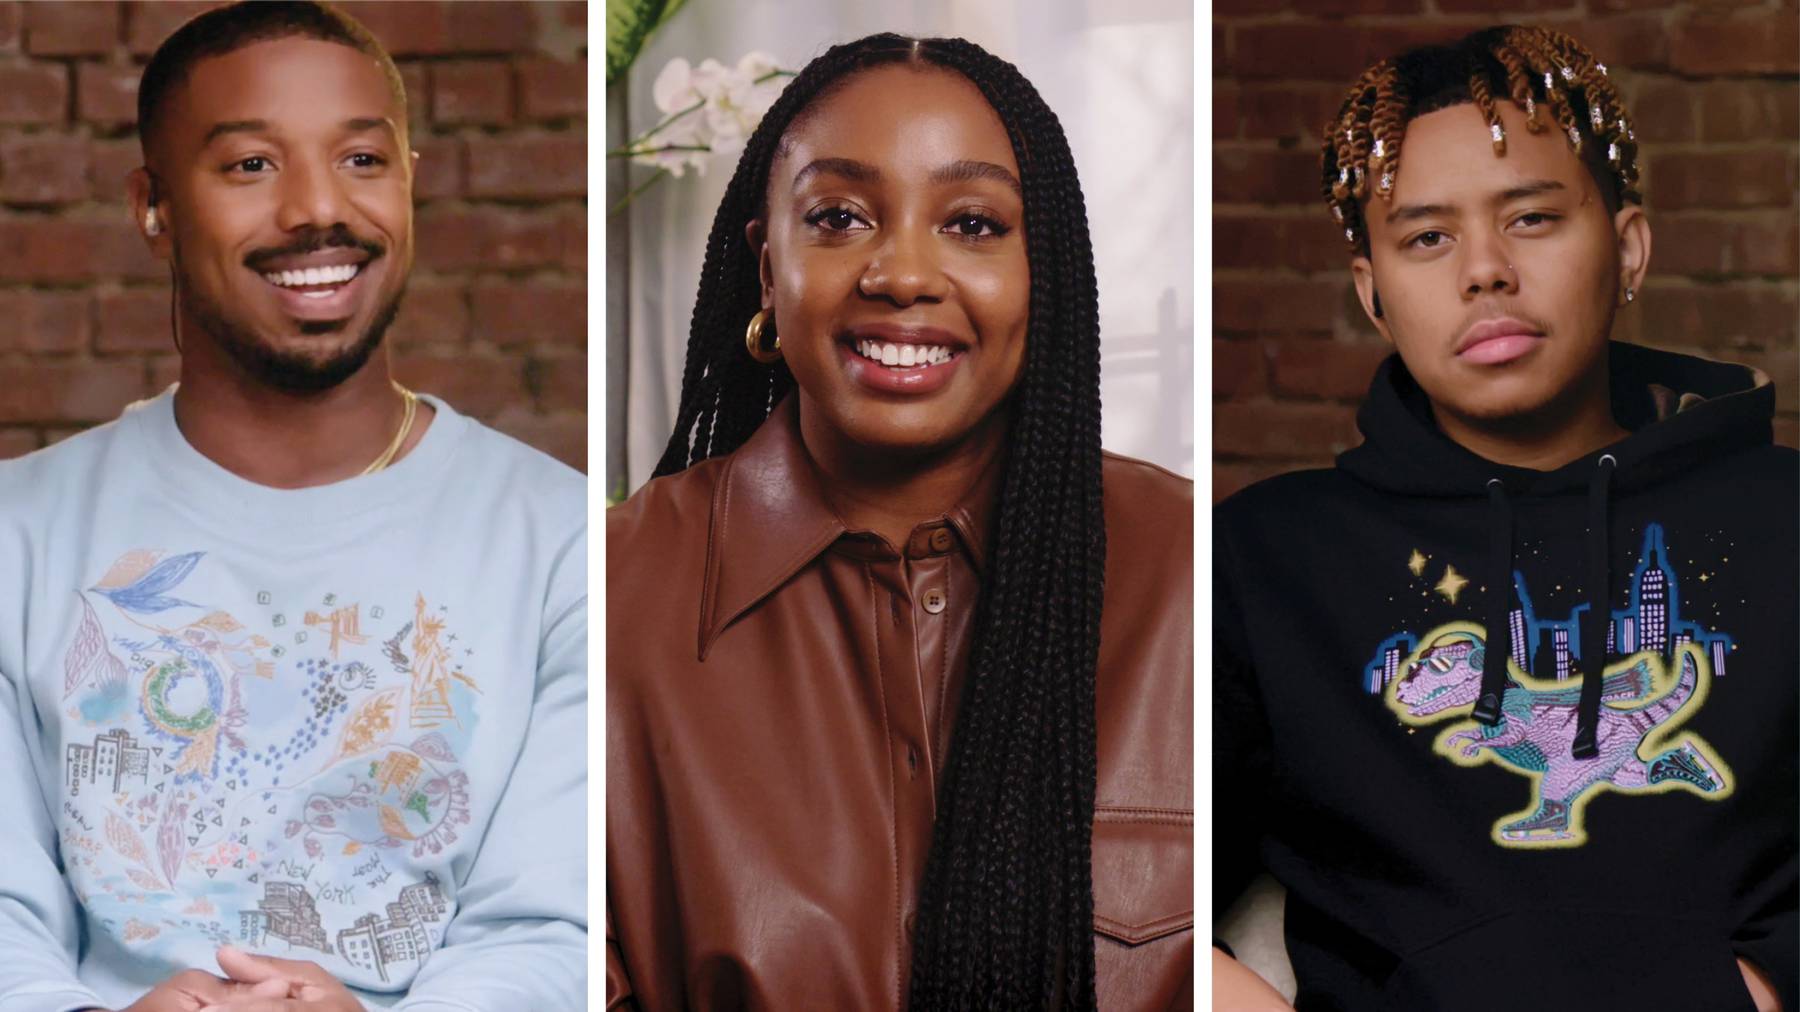 Actor Michael B. Jordan, The Cut editor in chief Lindsay Peoples Wagner and musician Cordae appeared on “Coach Conversations," the brand's YouTube series, in an episode timed to Black History Month. Coach.